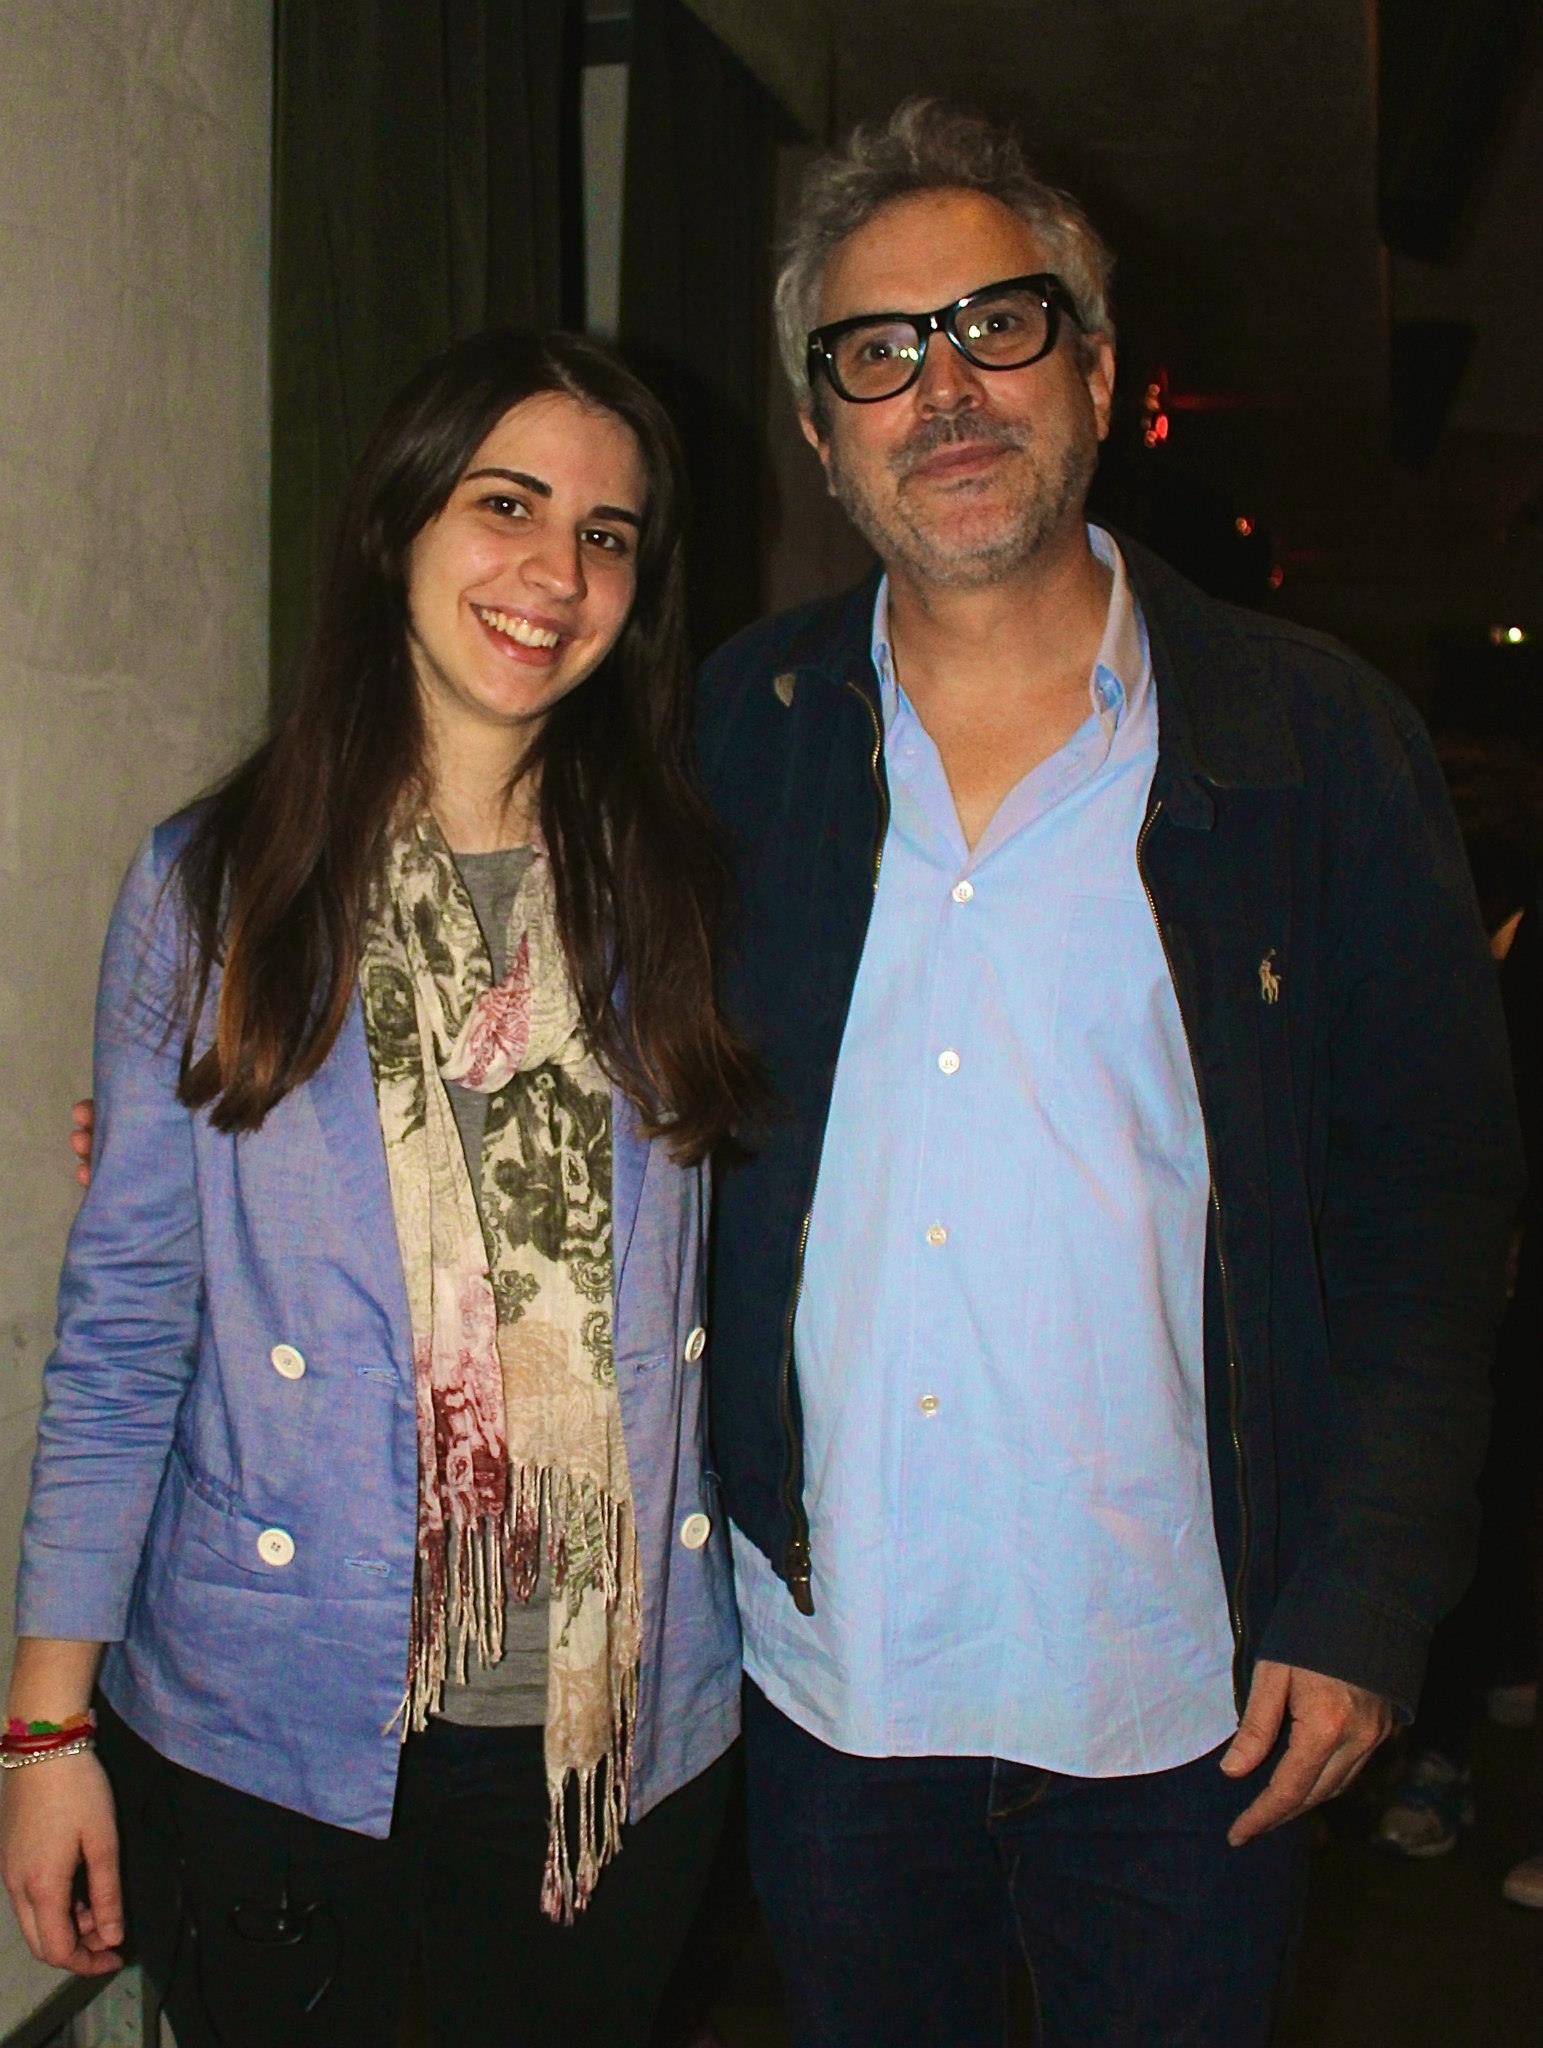 Colette and Alfonso Cuaron after the workshop